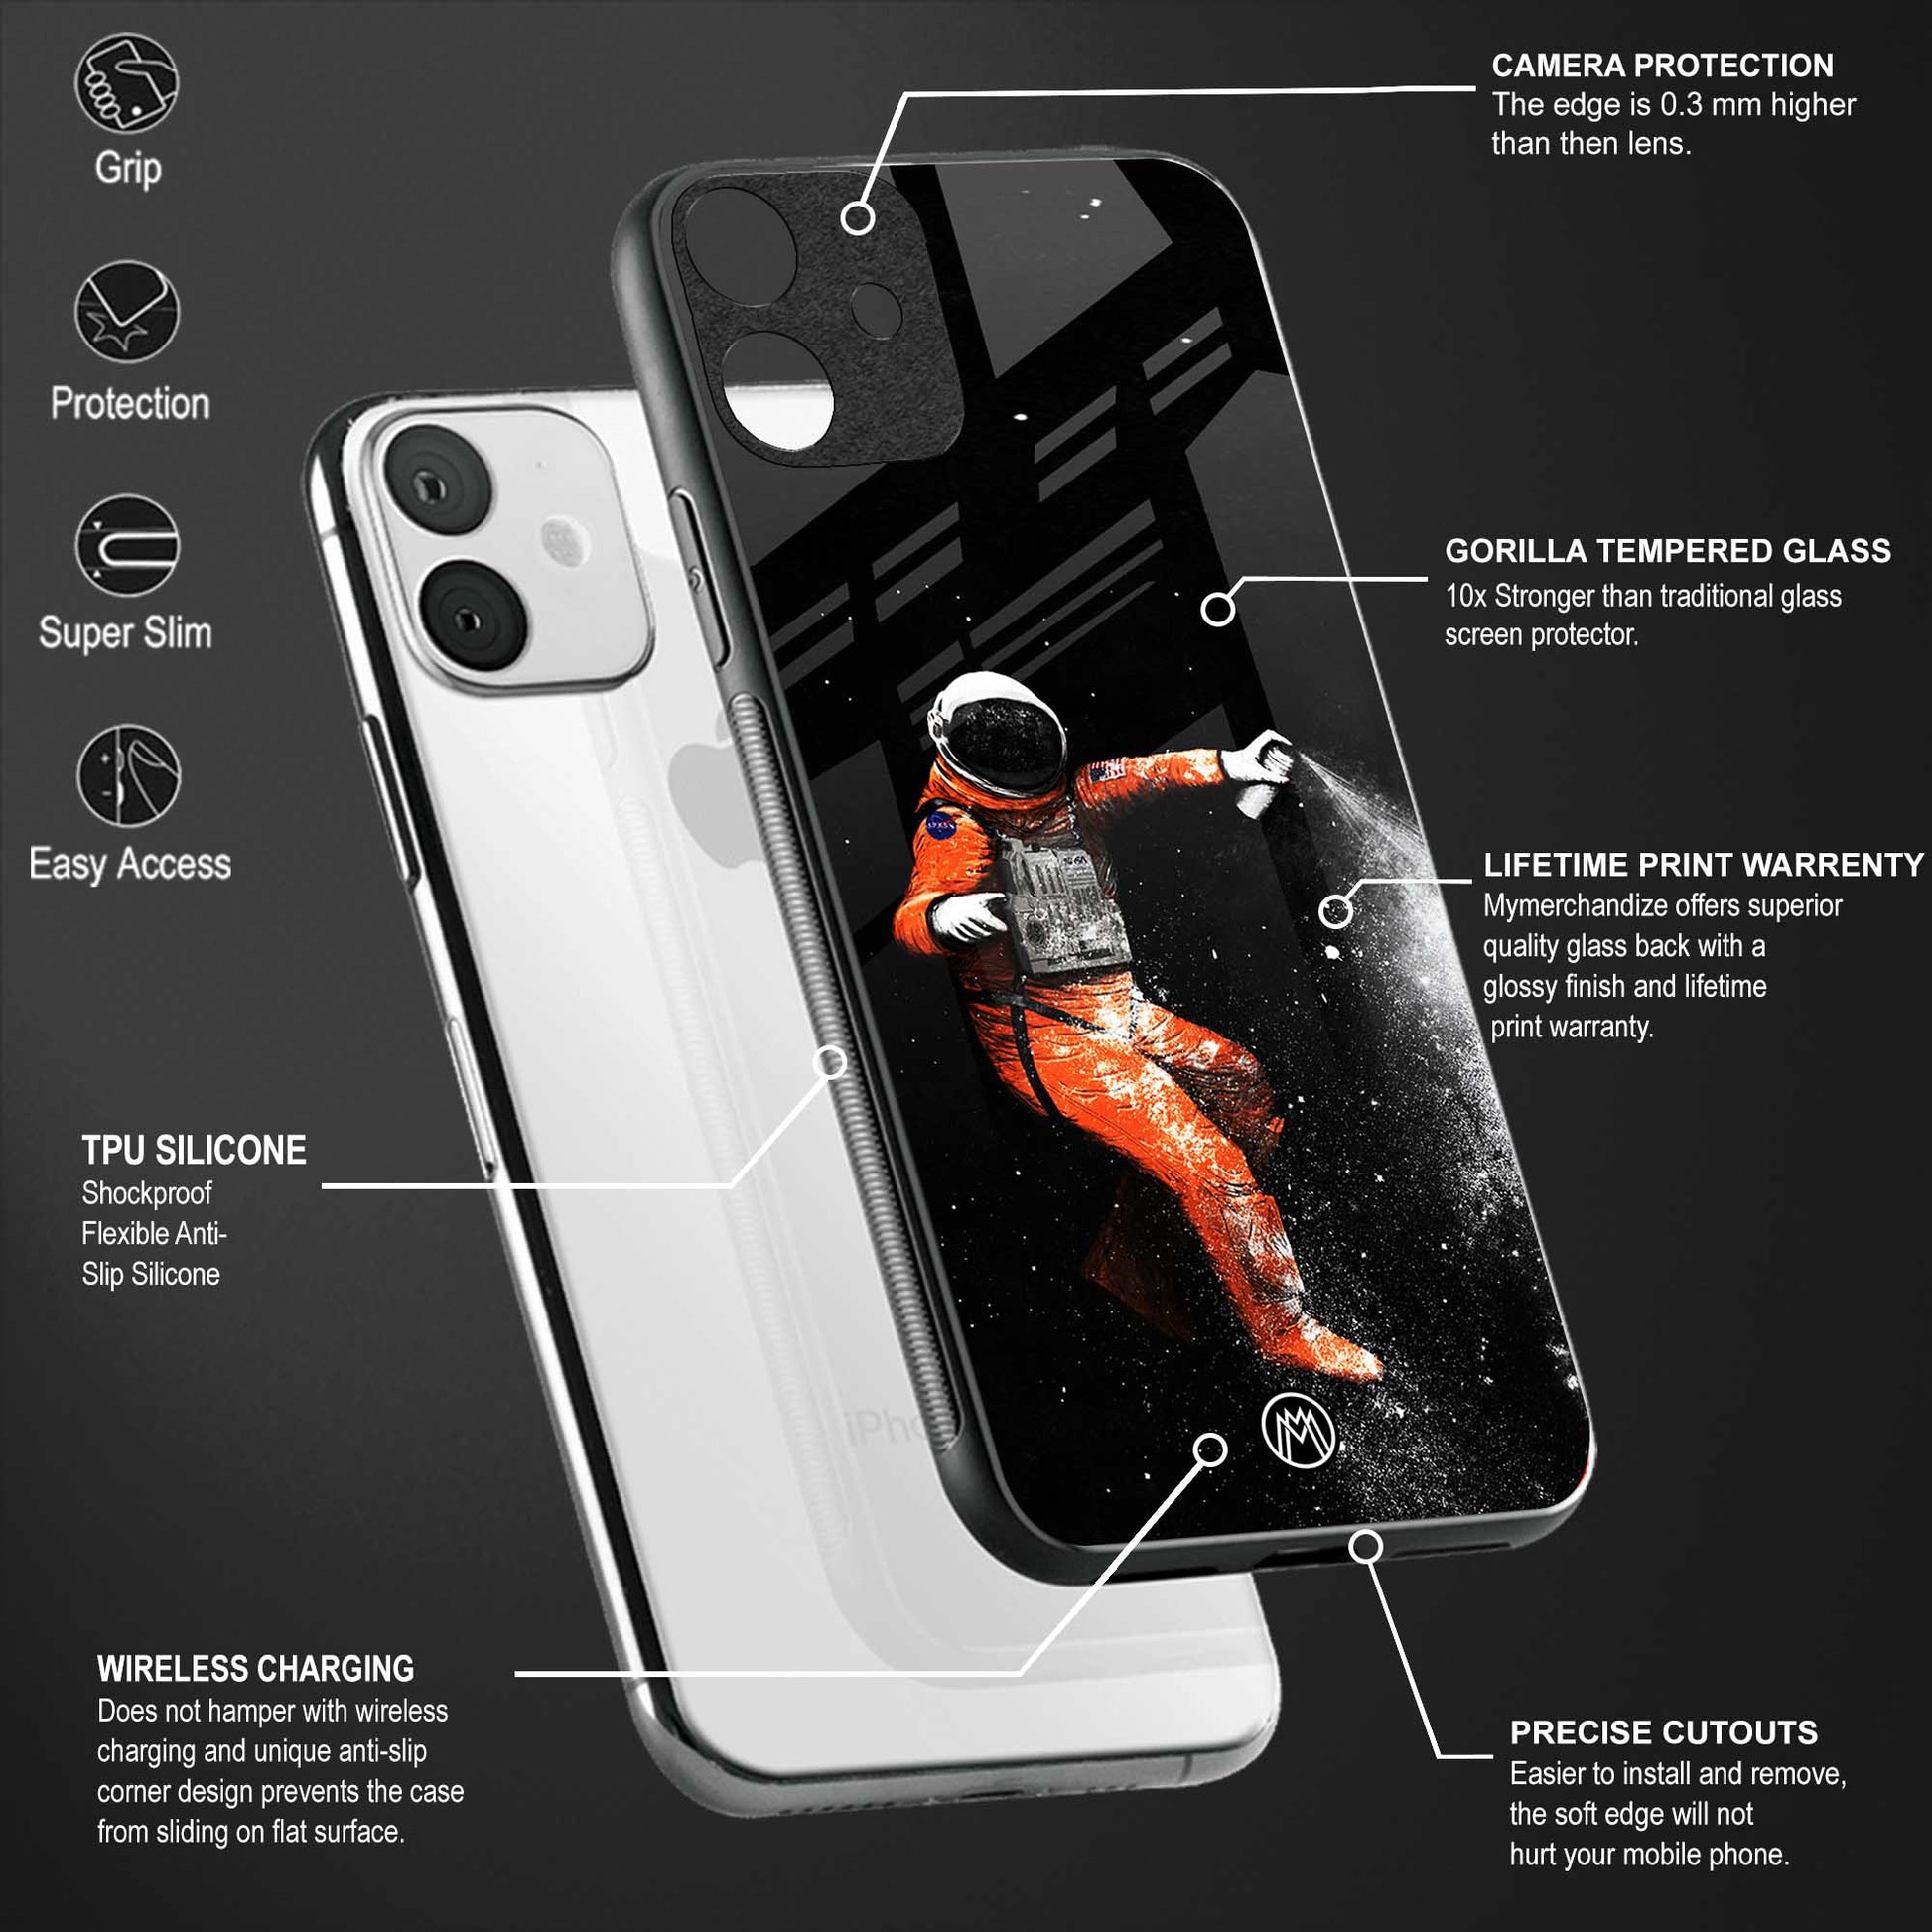 trippy astronaut back phone cover | glass case for samsung galaxy a23